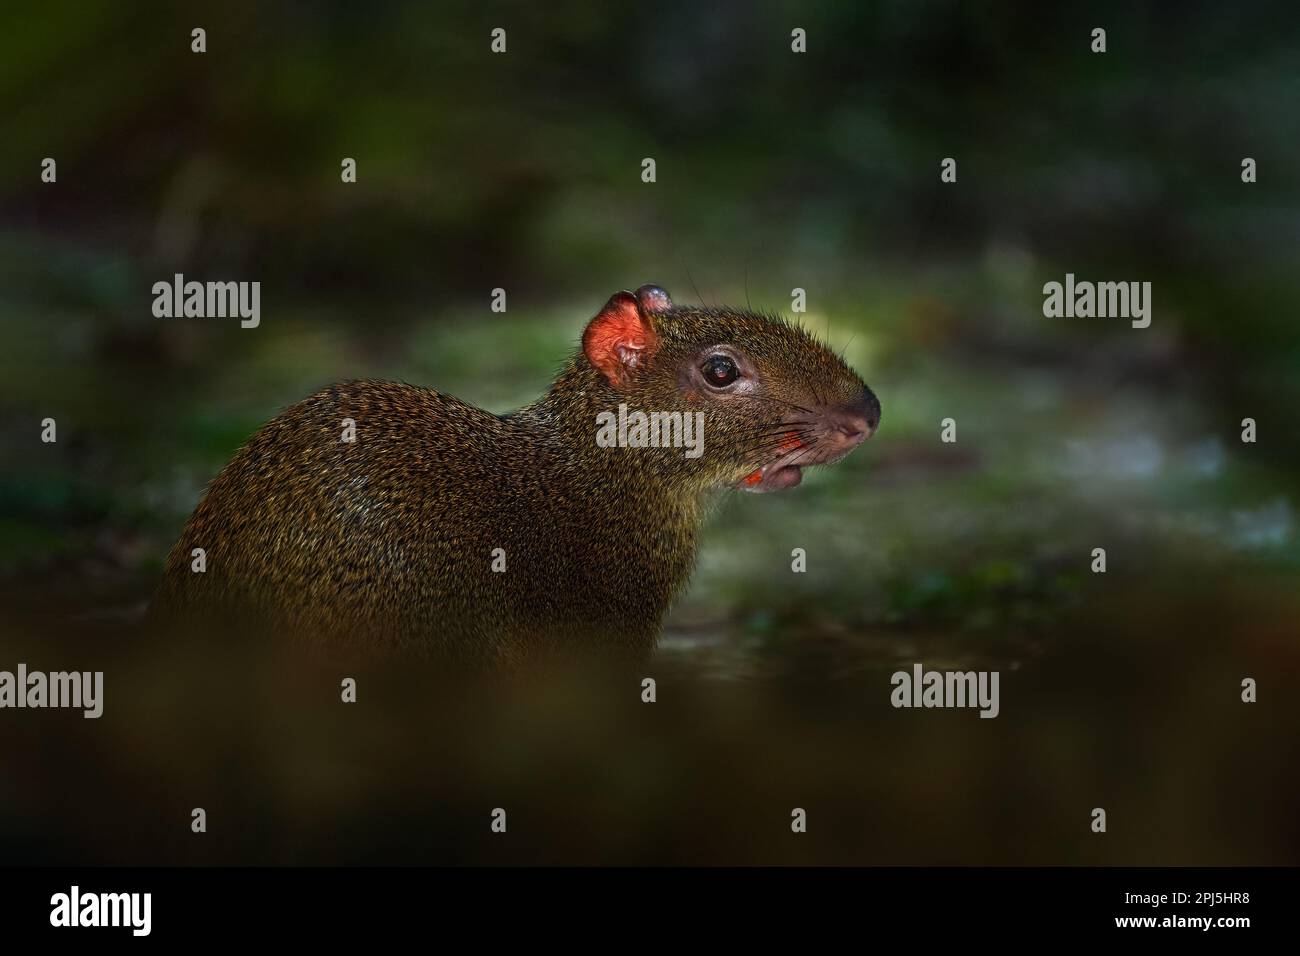 Wildlife Costa Rica. Agouti in the tropical forest. Animal in nature habitat, green jungle. Big wild mouse in green vegetation. Animal from Costa Rica Stock Photo